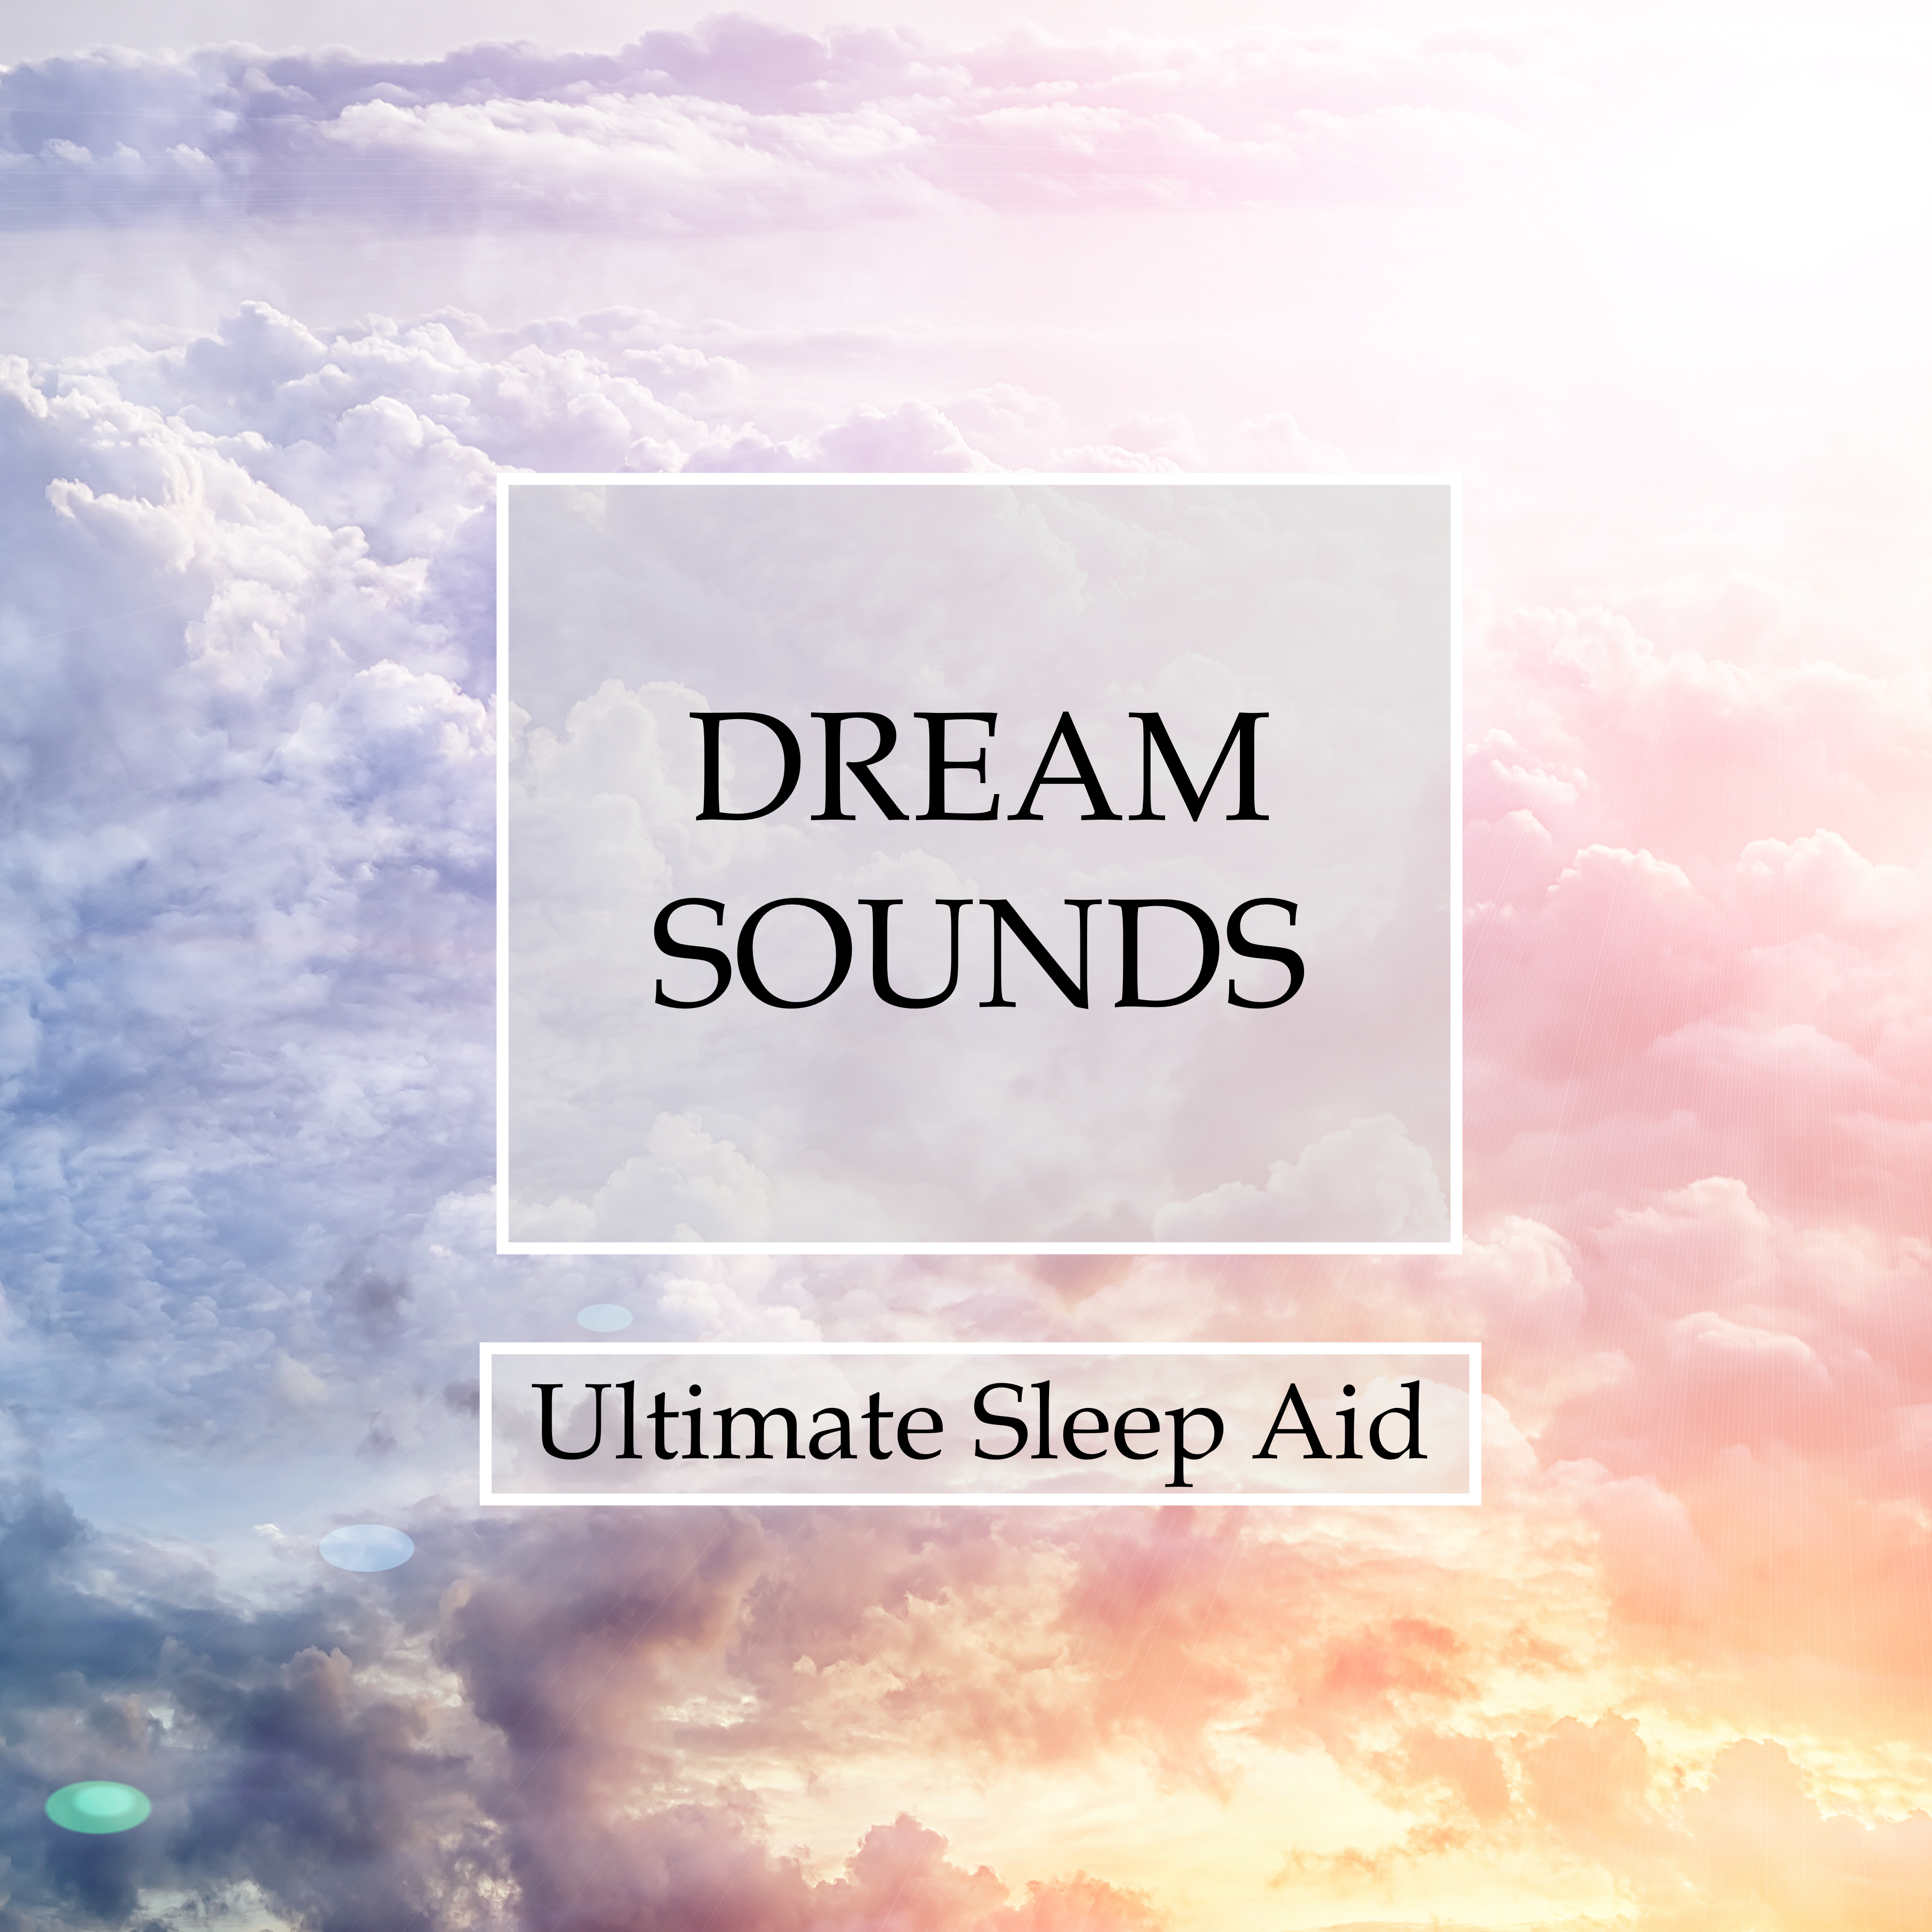 Dream Sounds Oasis - Ultimate Sleep Aid for Deep Lucid Dreams, Relaxation, Transcendental Meditation and Better Mental Health Through a Peaceful Ambience